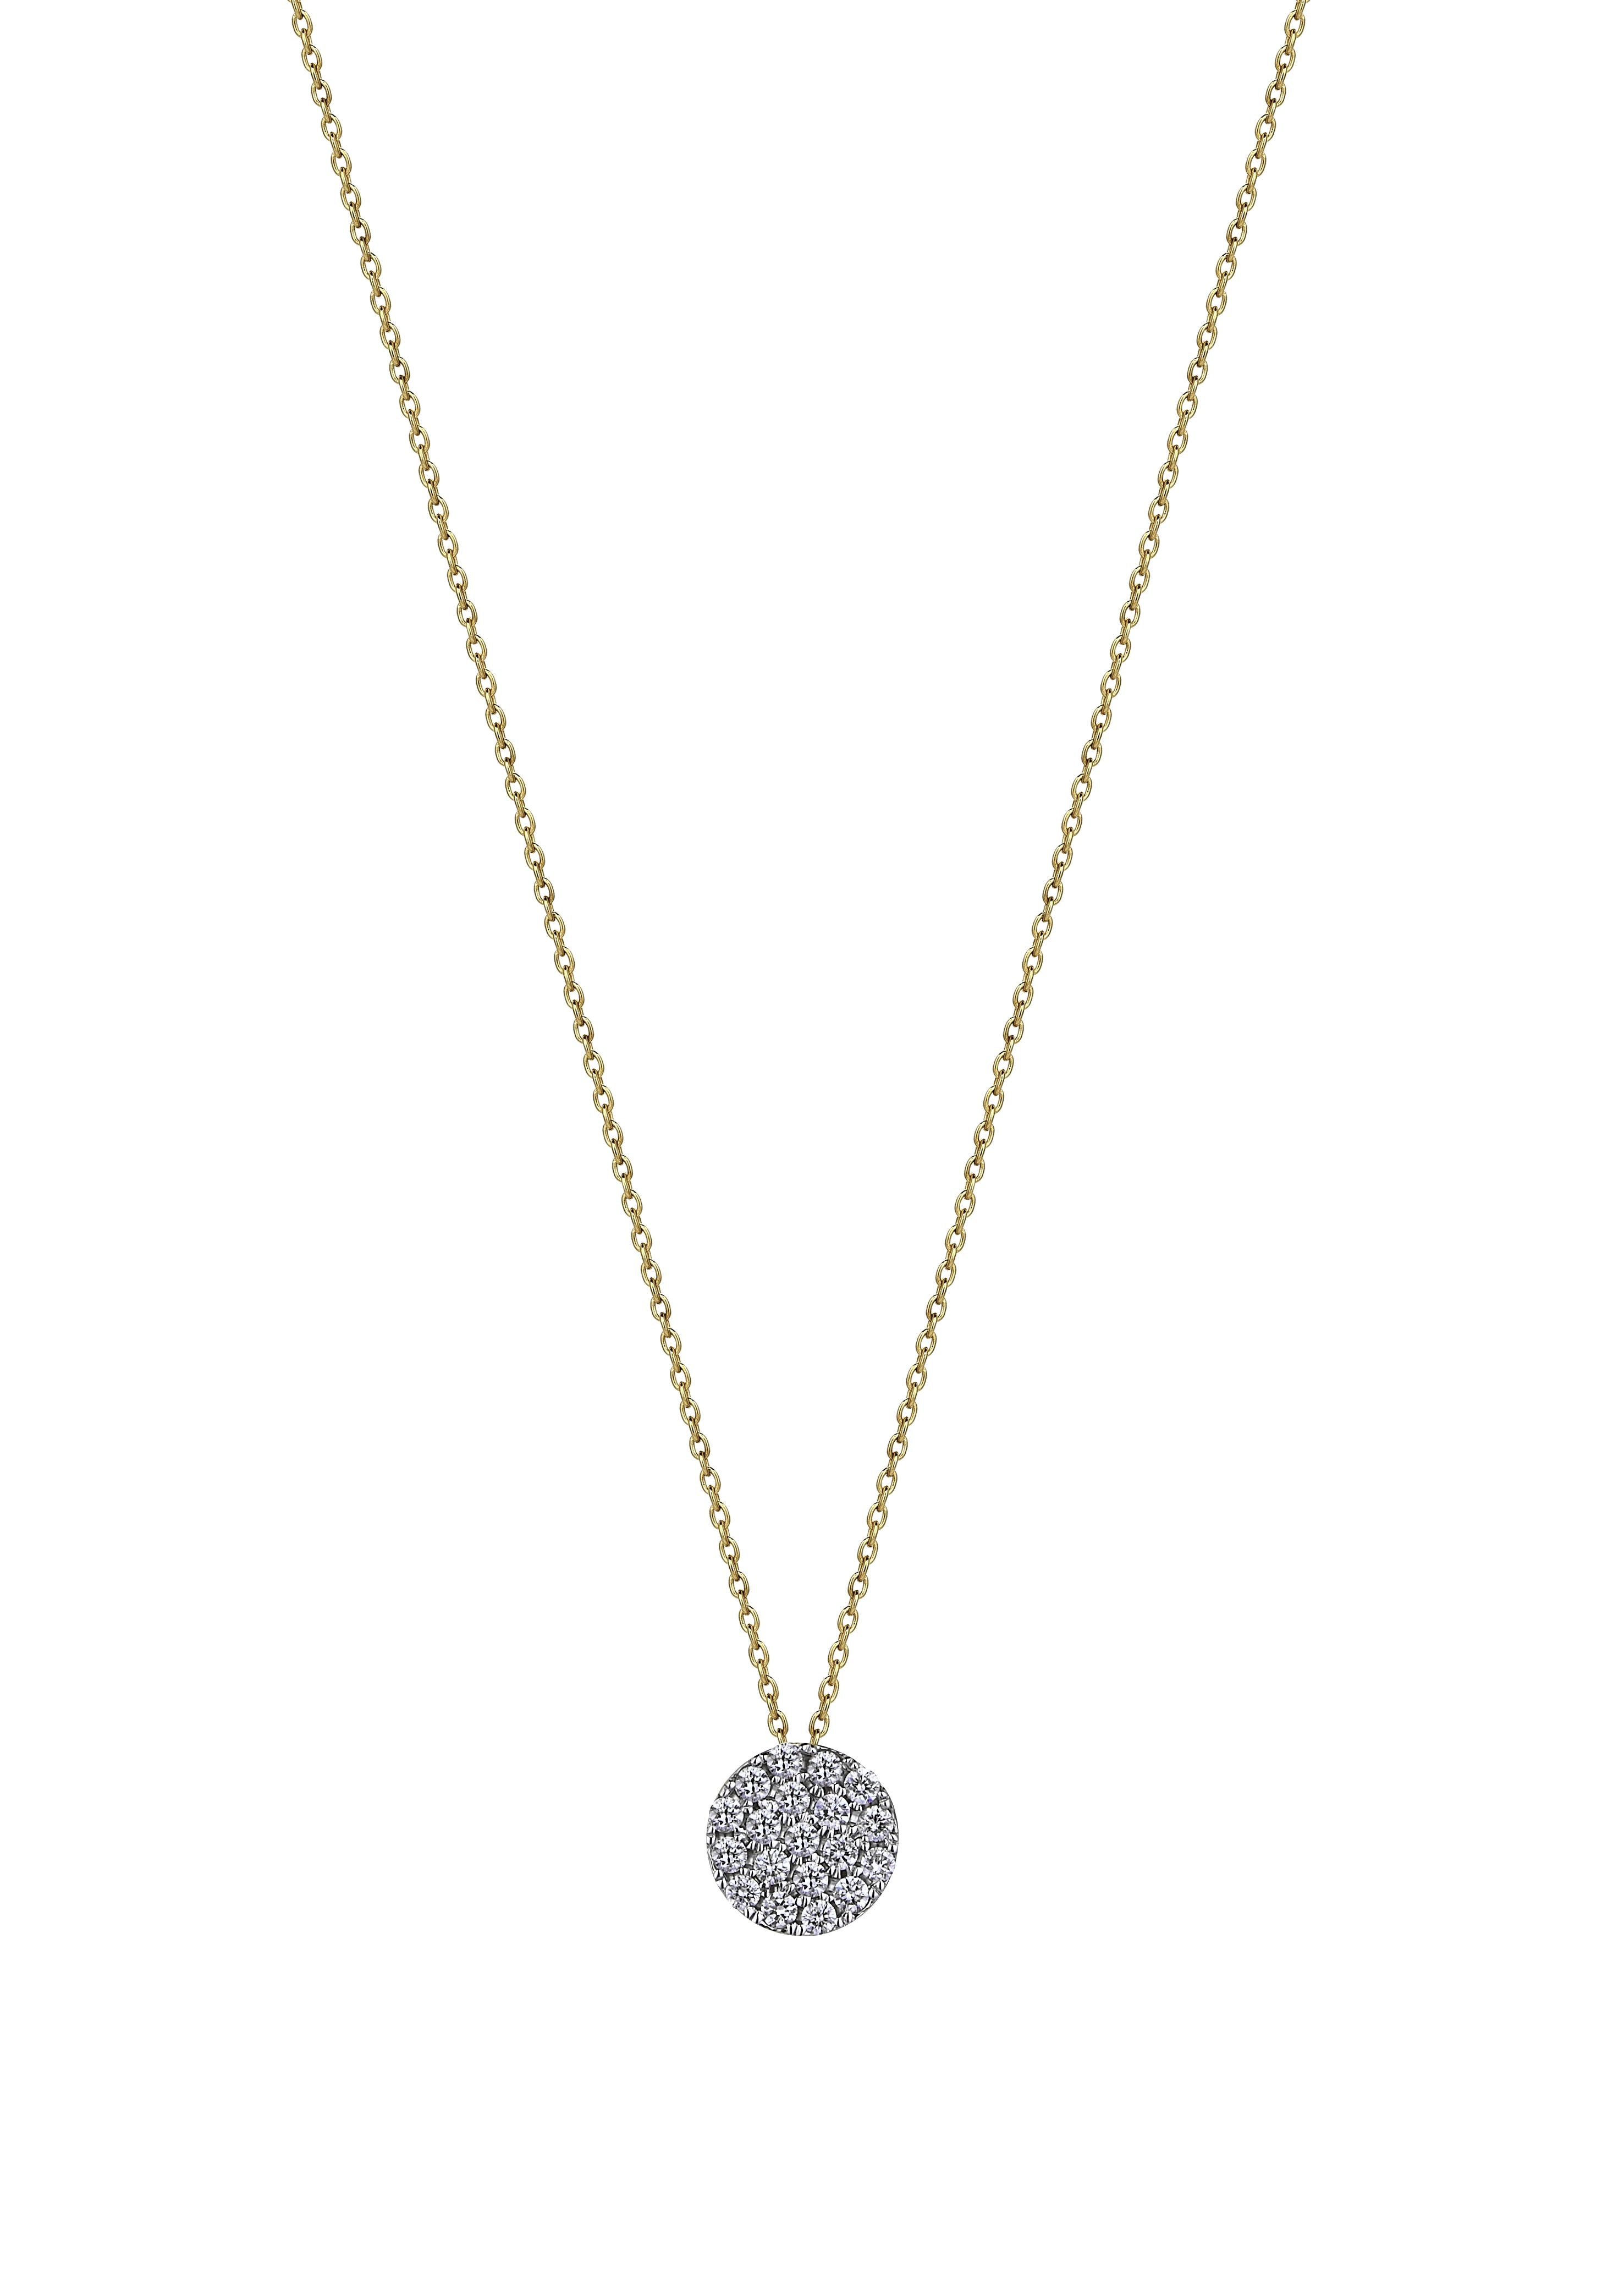 Pave Round Diamond Necklace in Yellow Gold - Her Story Shop